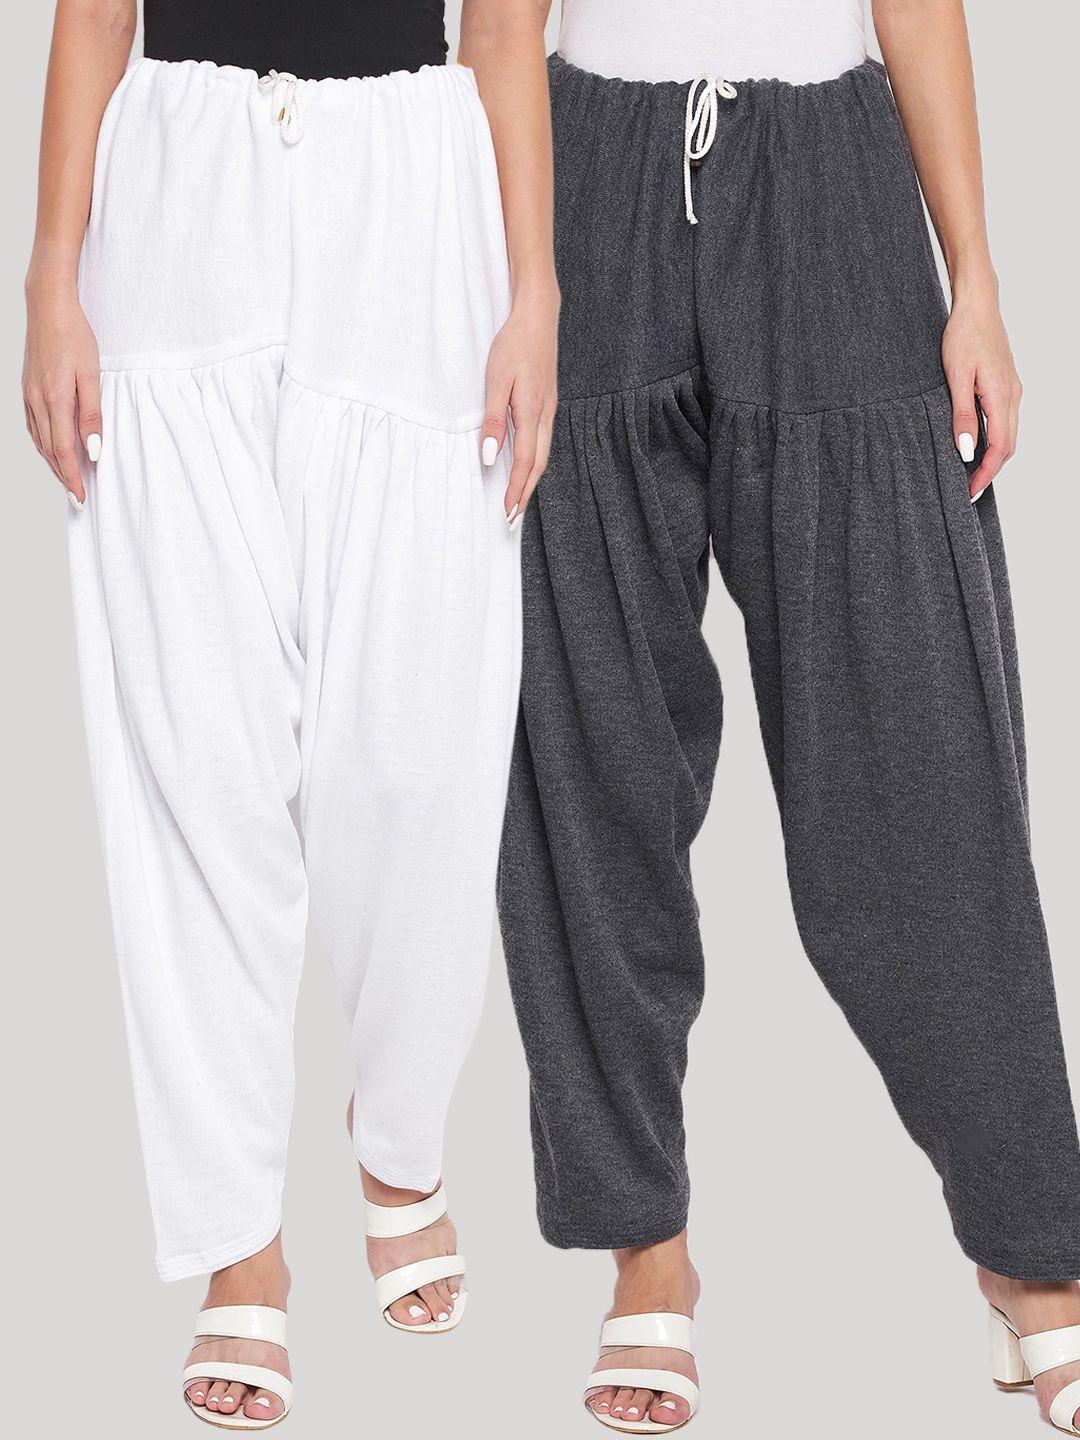 clora creation women pack of 2 white & charcoal solid  salwars